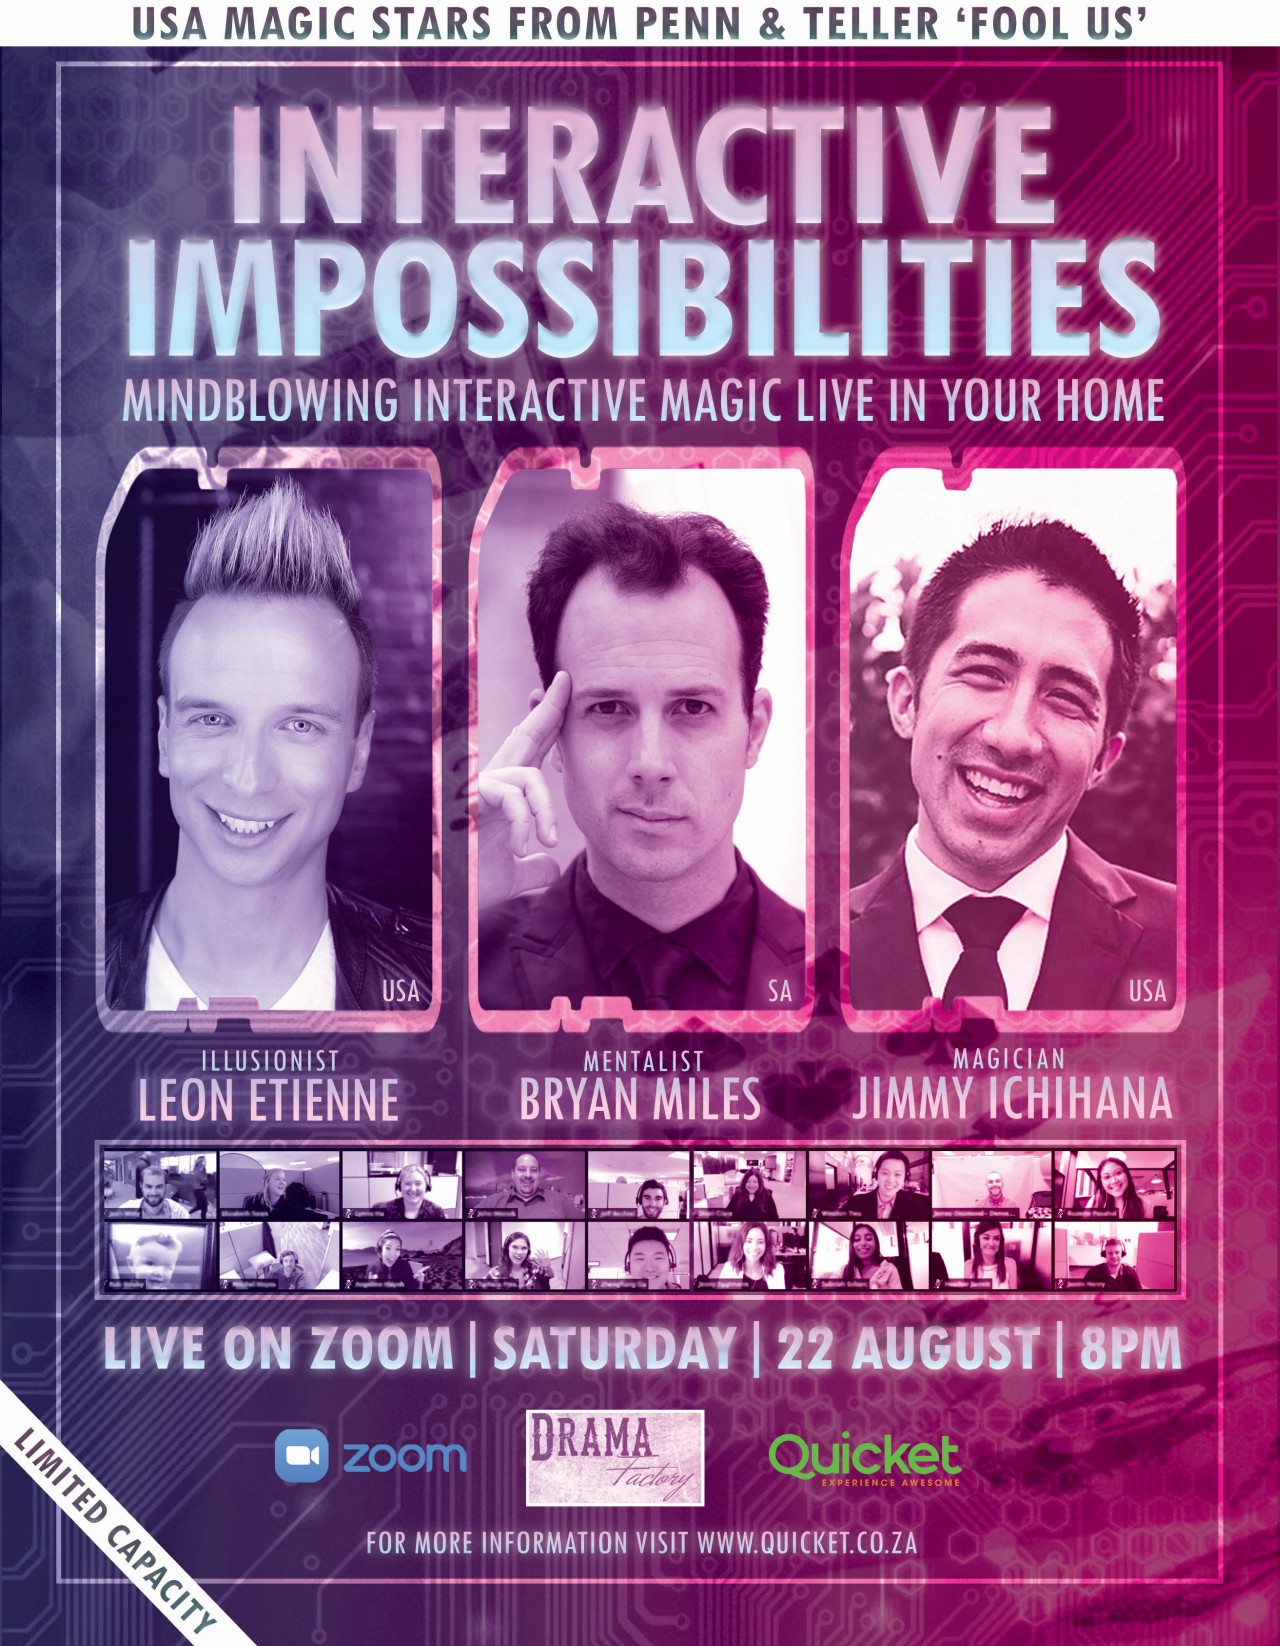 Interactive Impossibilities:
22 AUGUST - Sat, 8:00 PM - 9:00 PM
